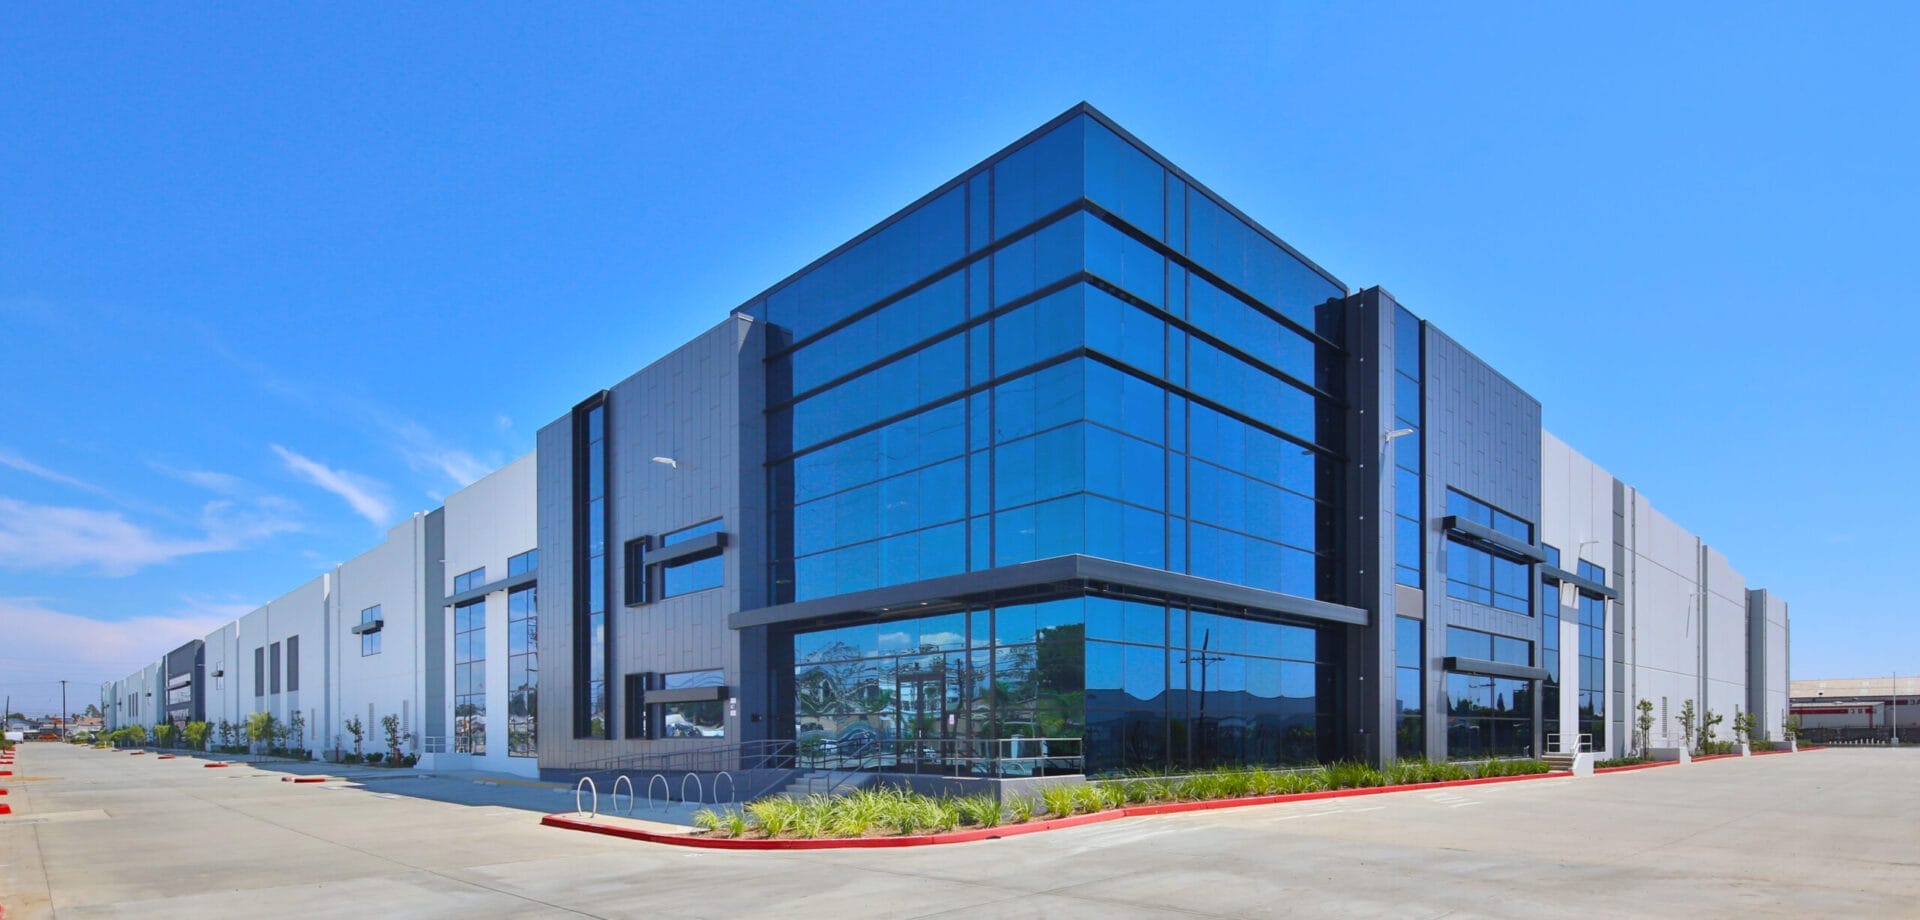 Bridge Point Long Beach Wins Bronze Award at LABJ’s 2022 Commercial Real Estate Awards: Industrial